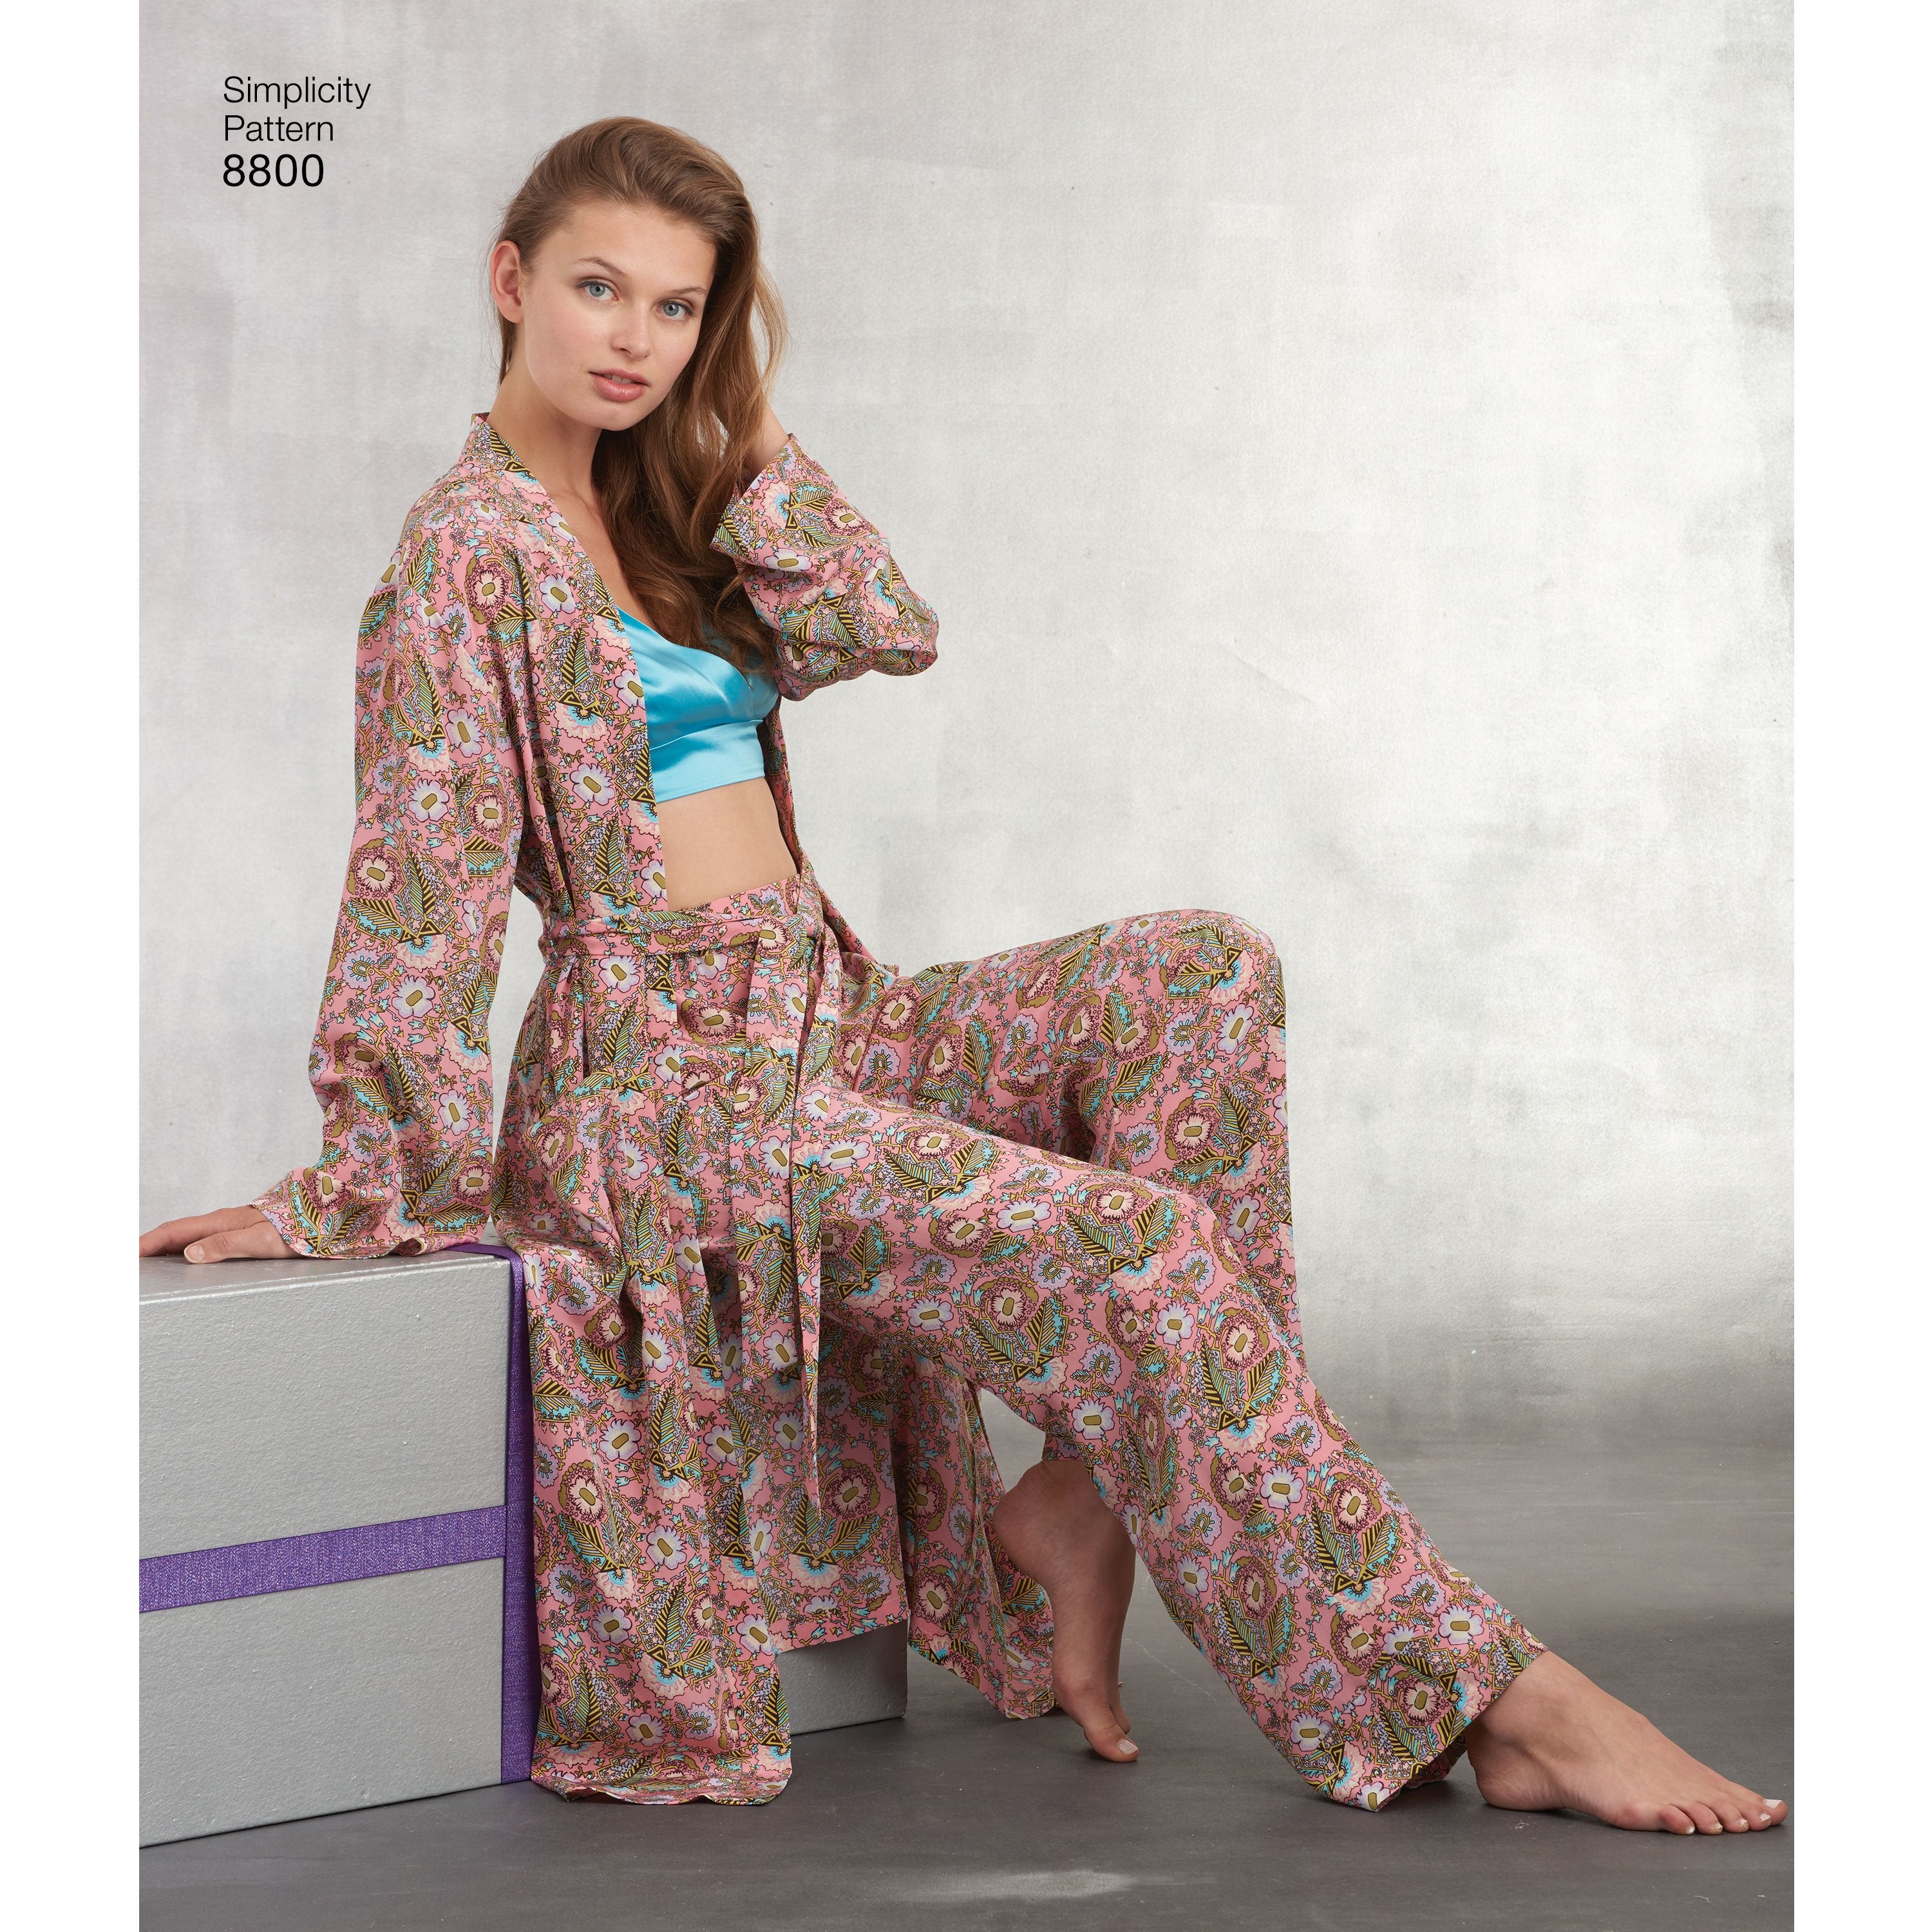 Simplicity Pattern 8800 misses robe pants top from Jaycotts Sewing Supplies